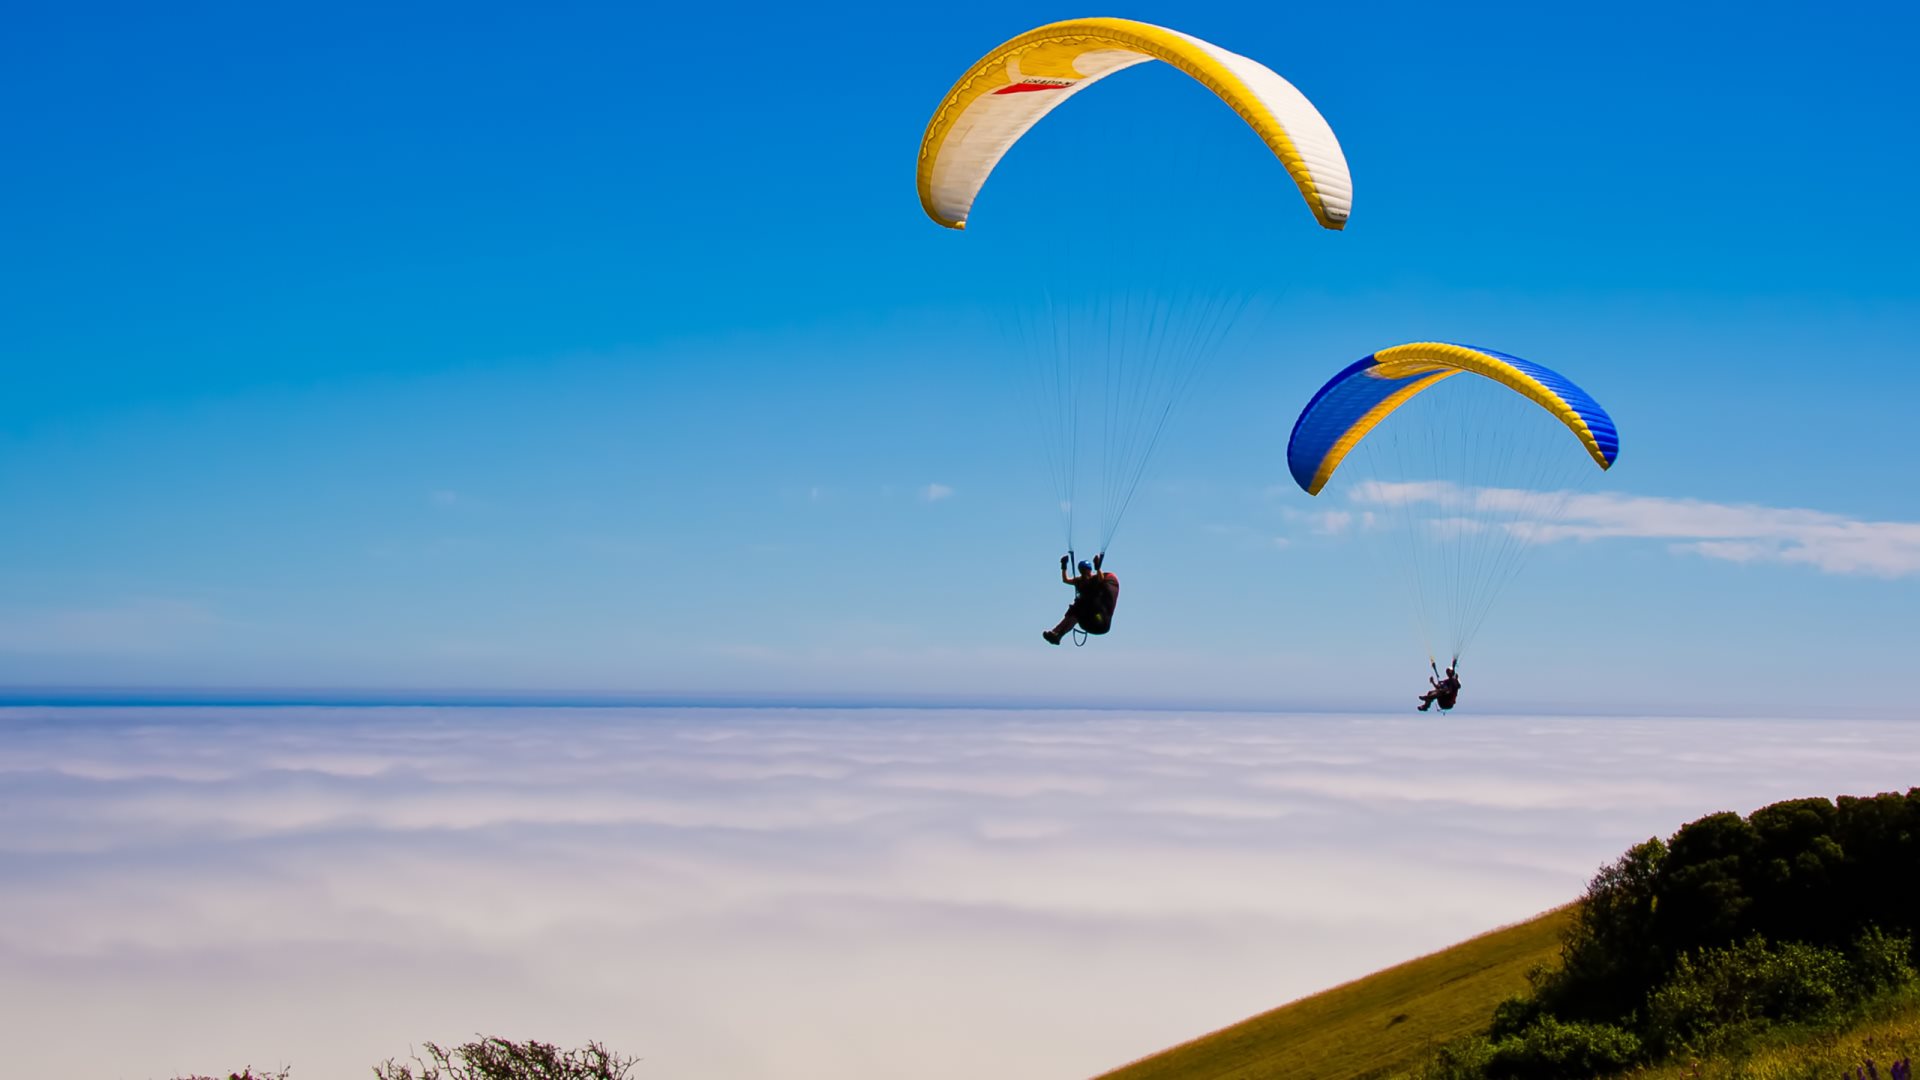 Paragliding experience of visually impaired persons: ‘living your dreams requires courage, not sight’